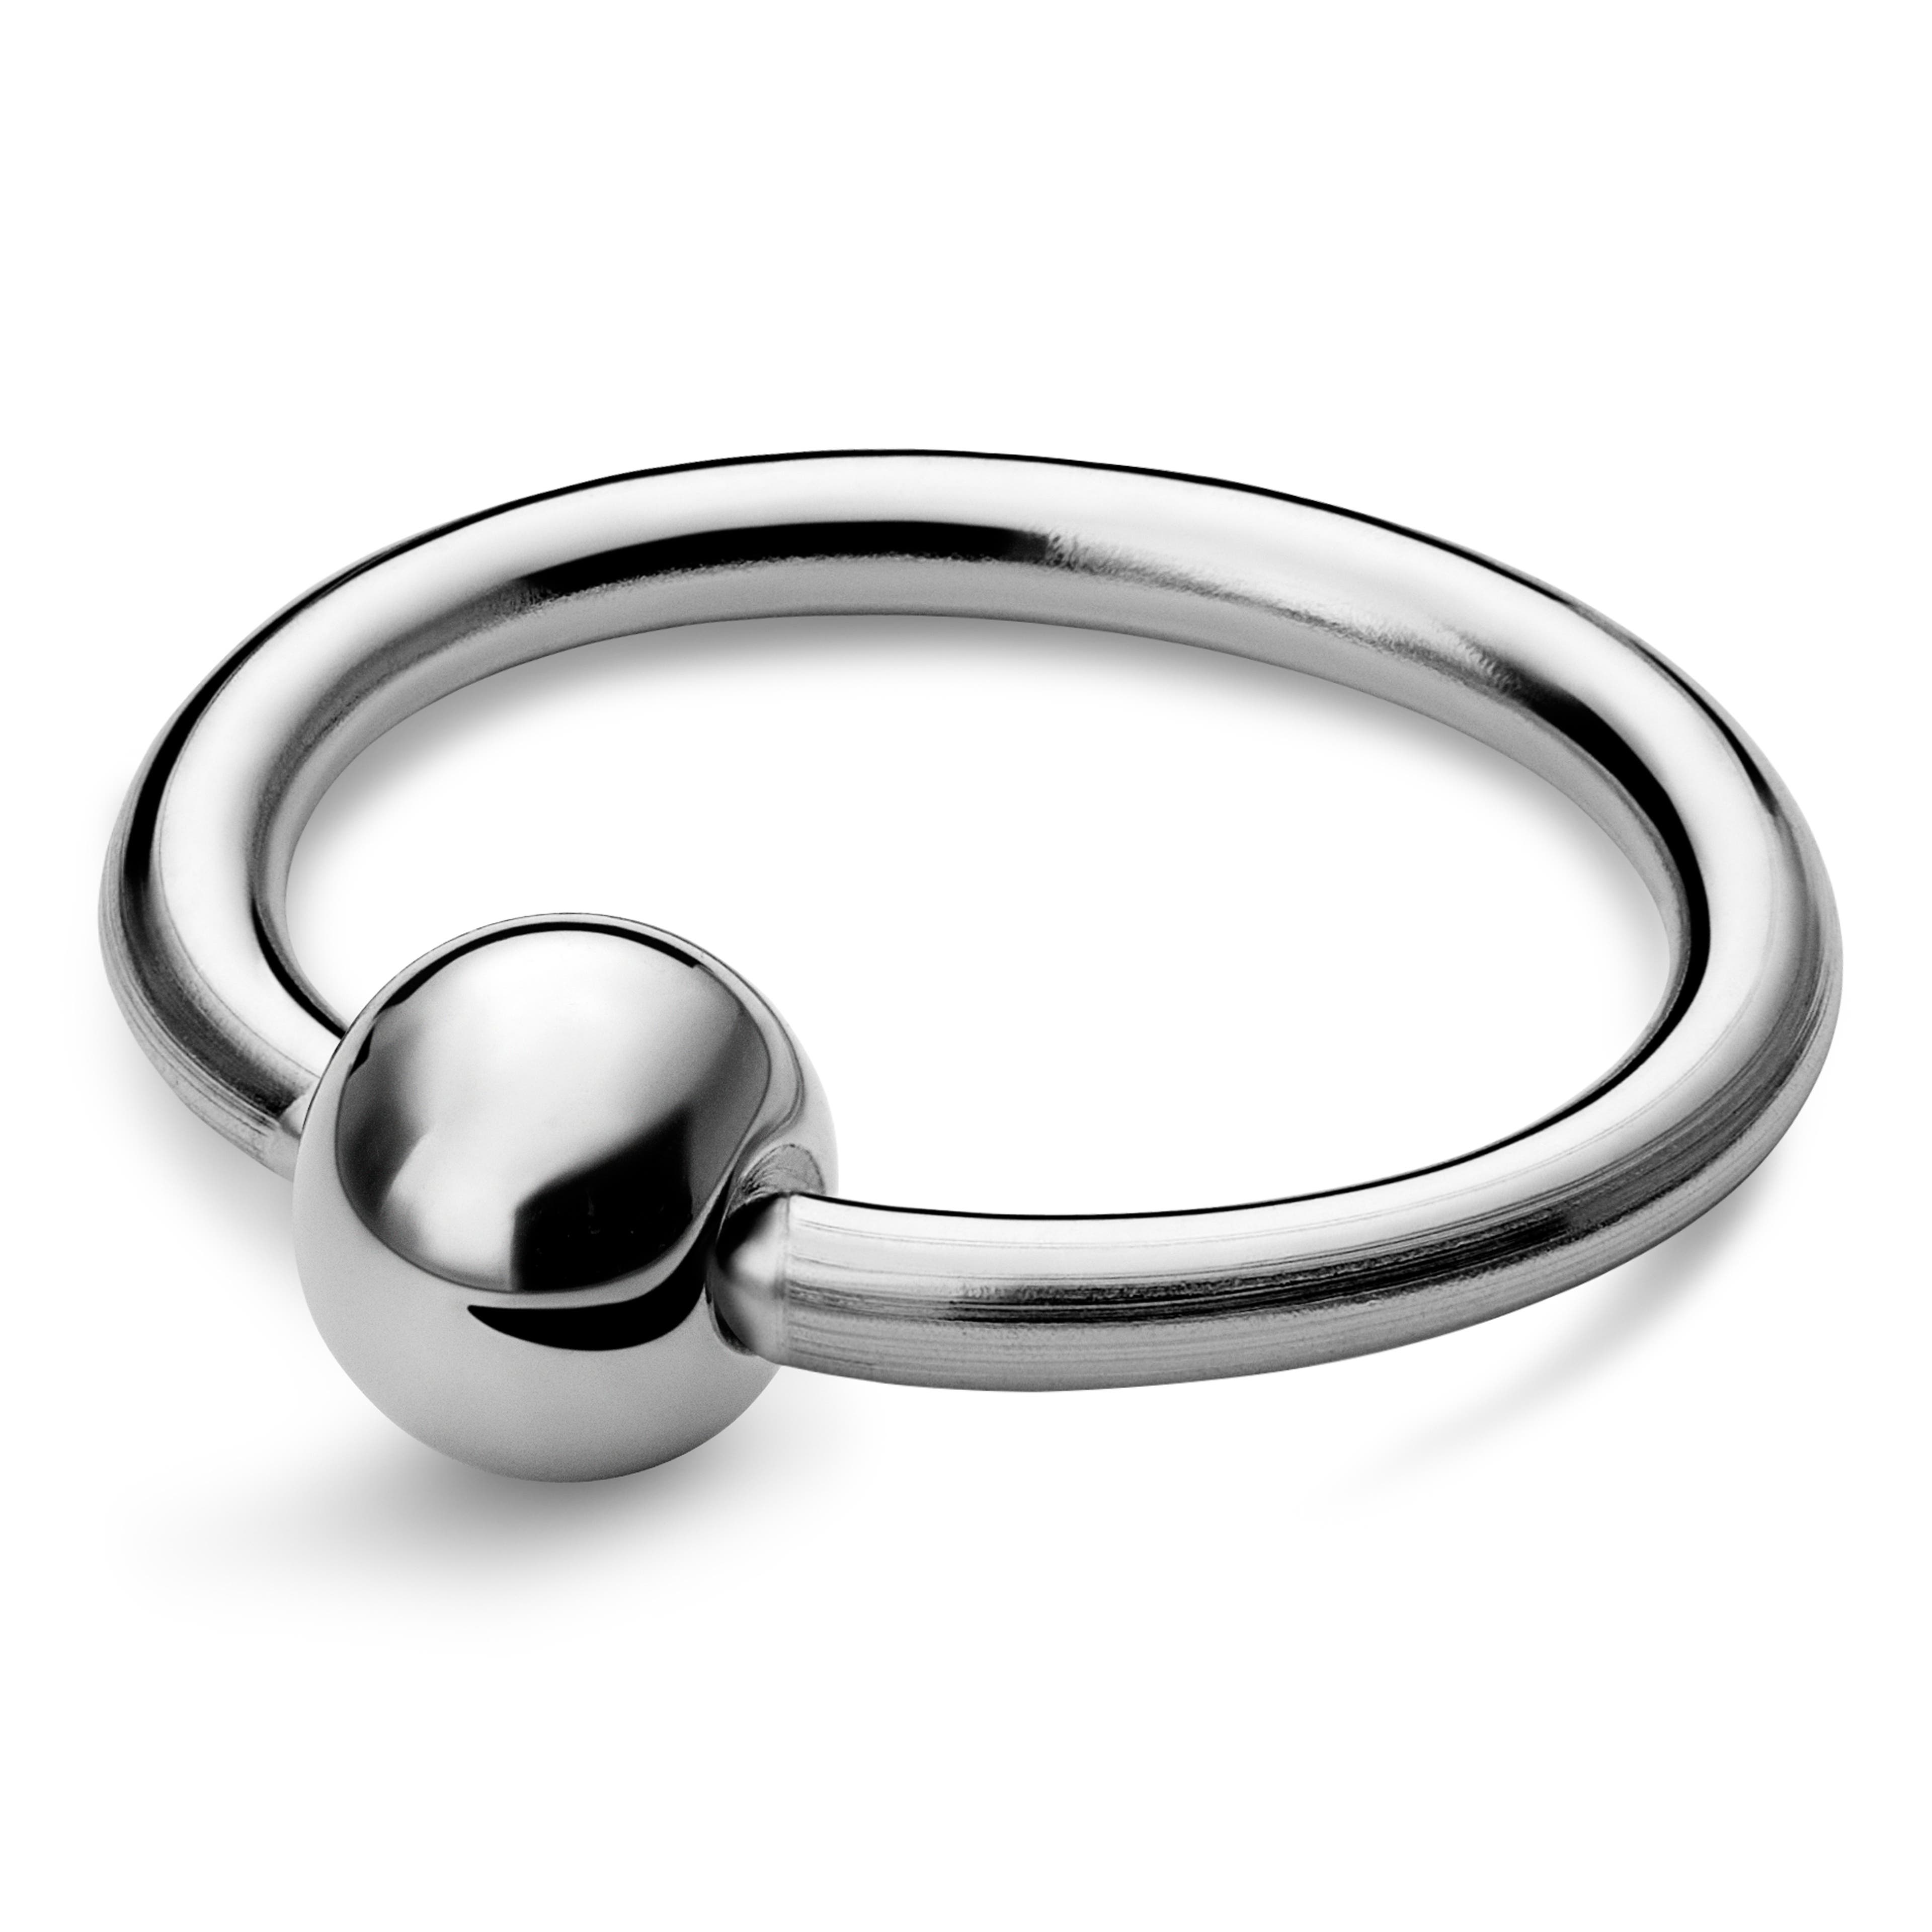 1/2" (12 mm) Silver-Tone Surgical Steel Captive Bead Ring